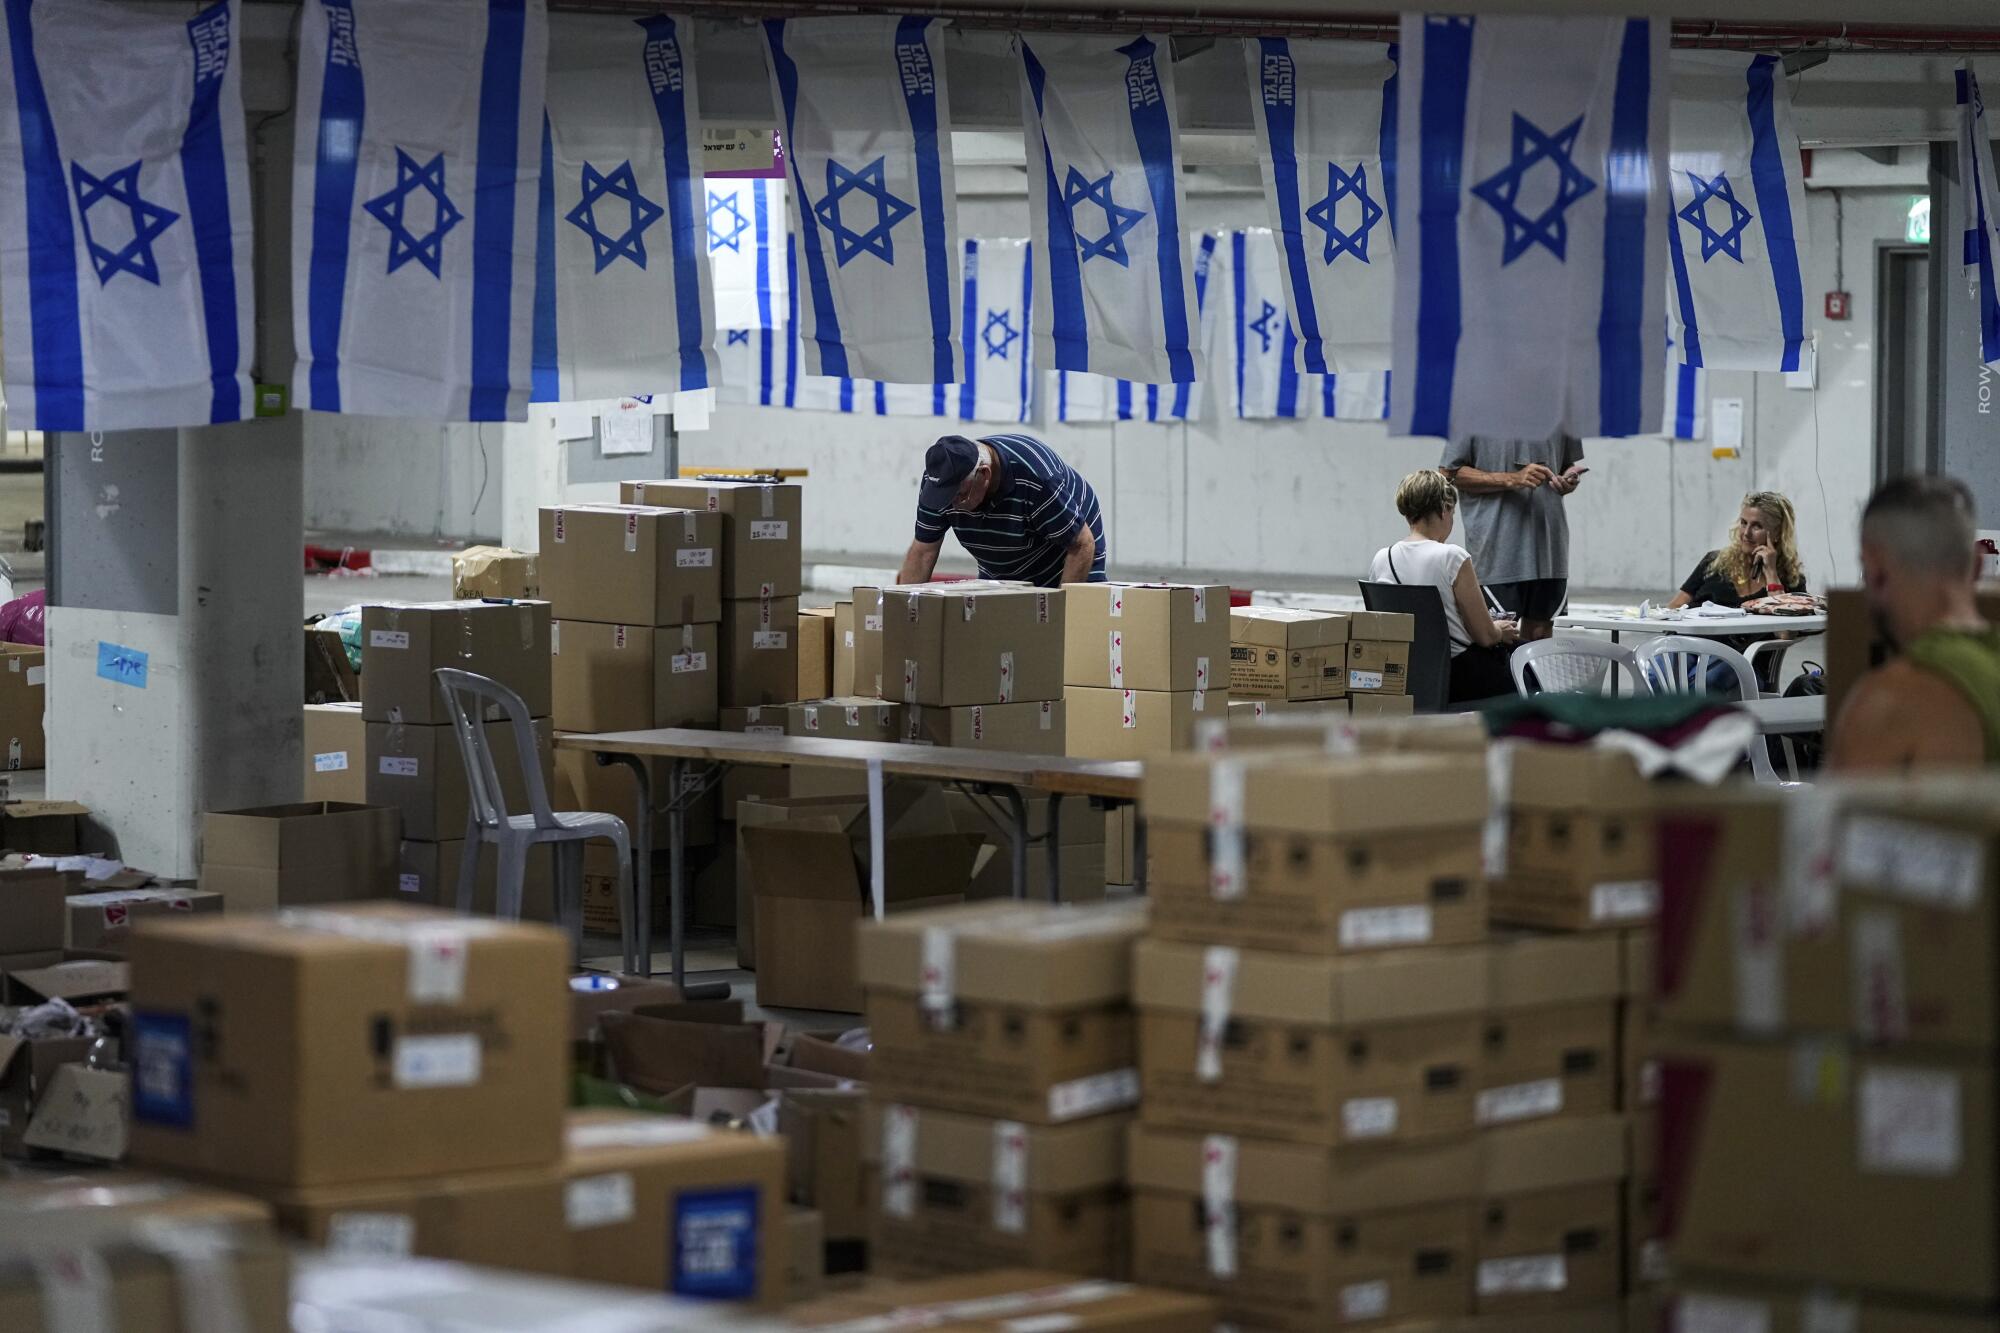 Volunteers working at an aid center to support Israeli soldiers